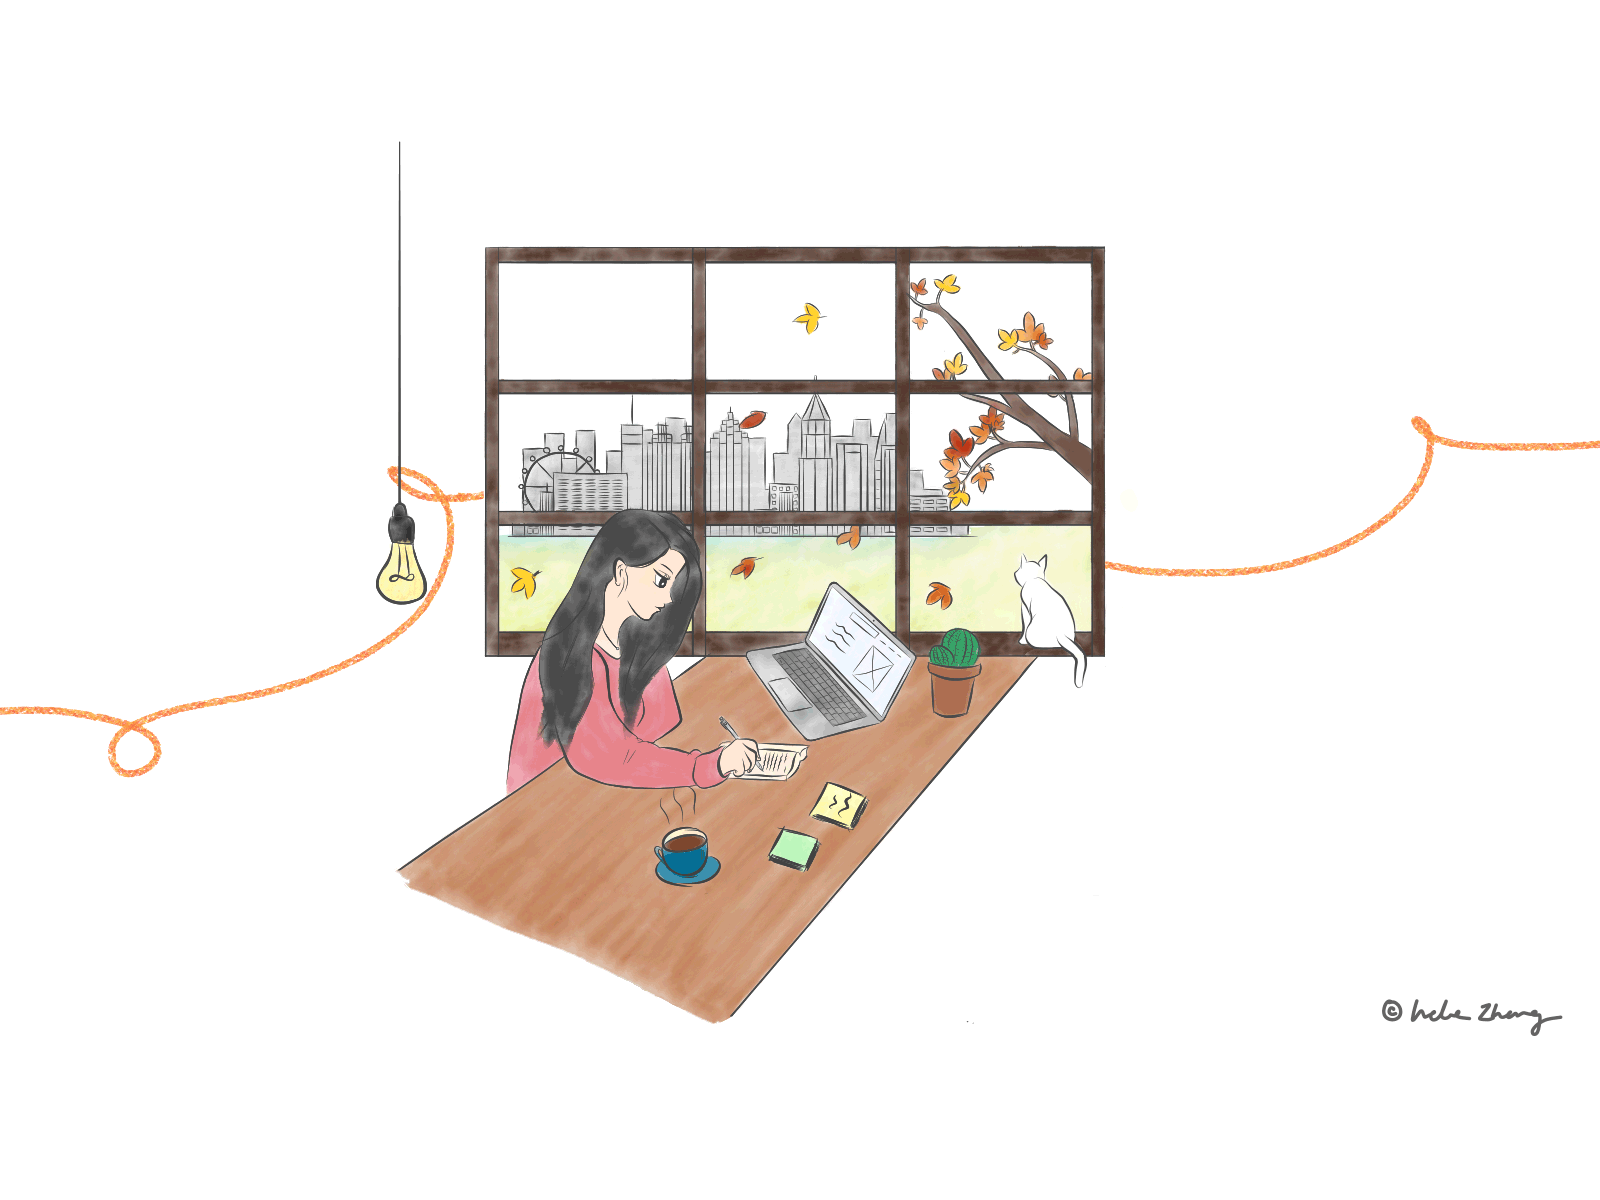 work from home - stay home stay safe adobe fresco adobe photoshop animation creativity illustration just for fun